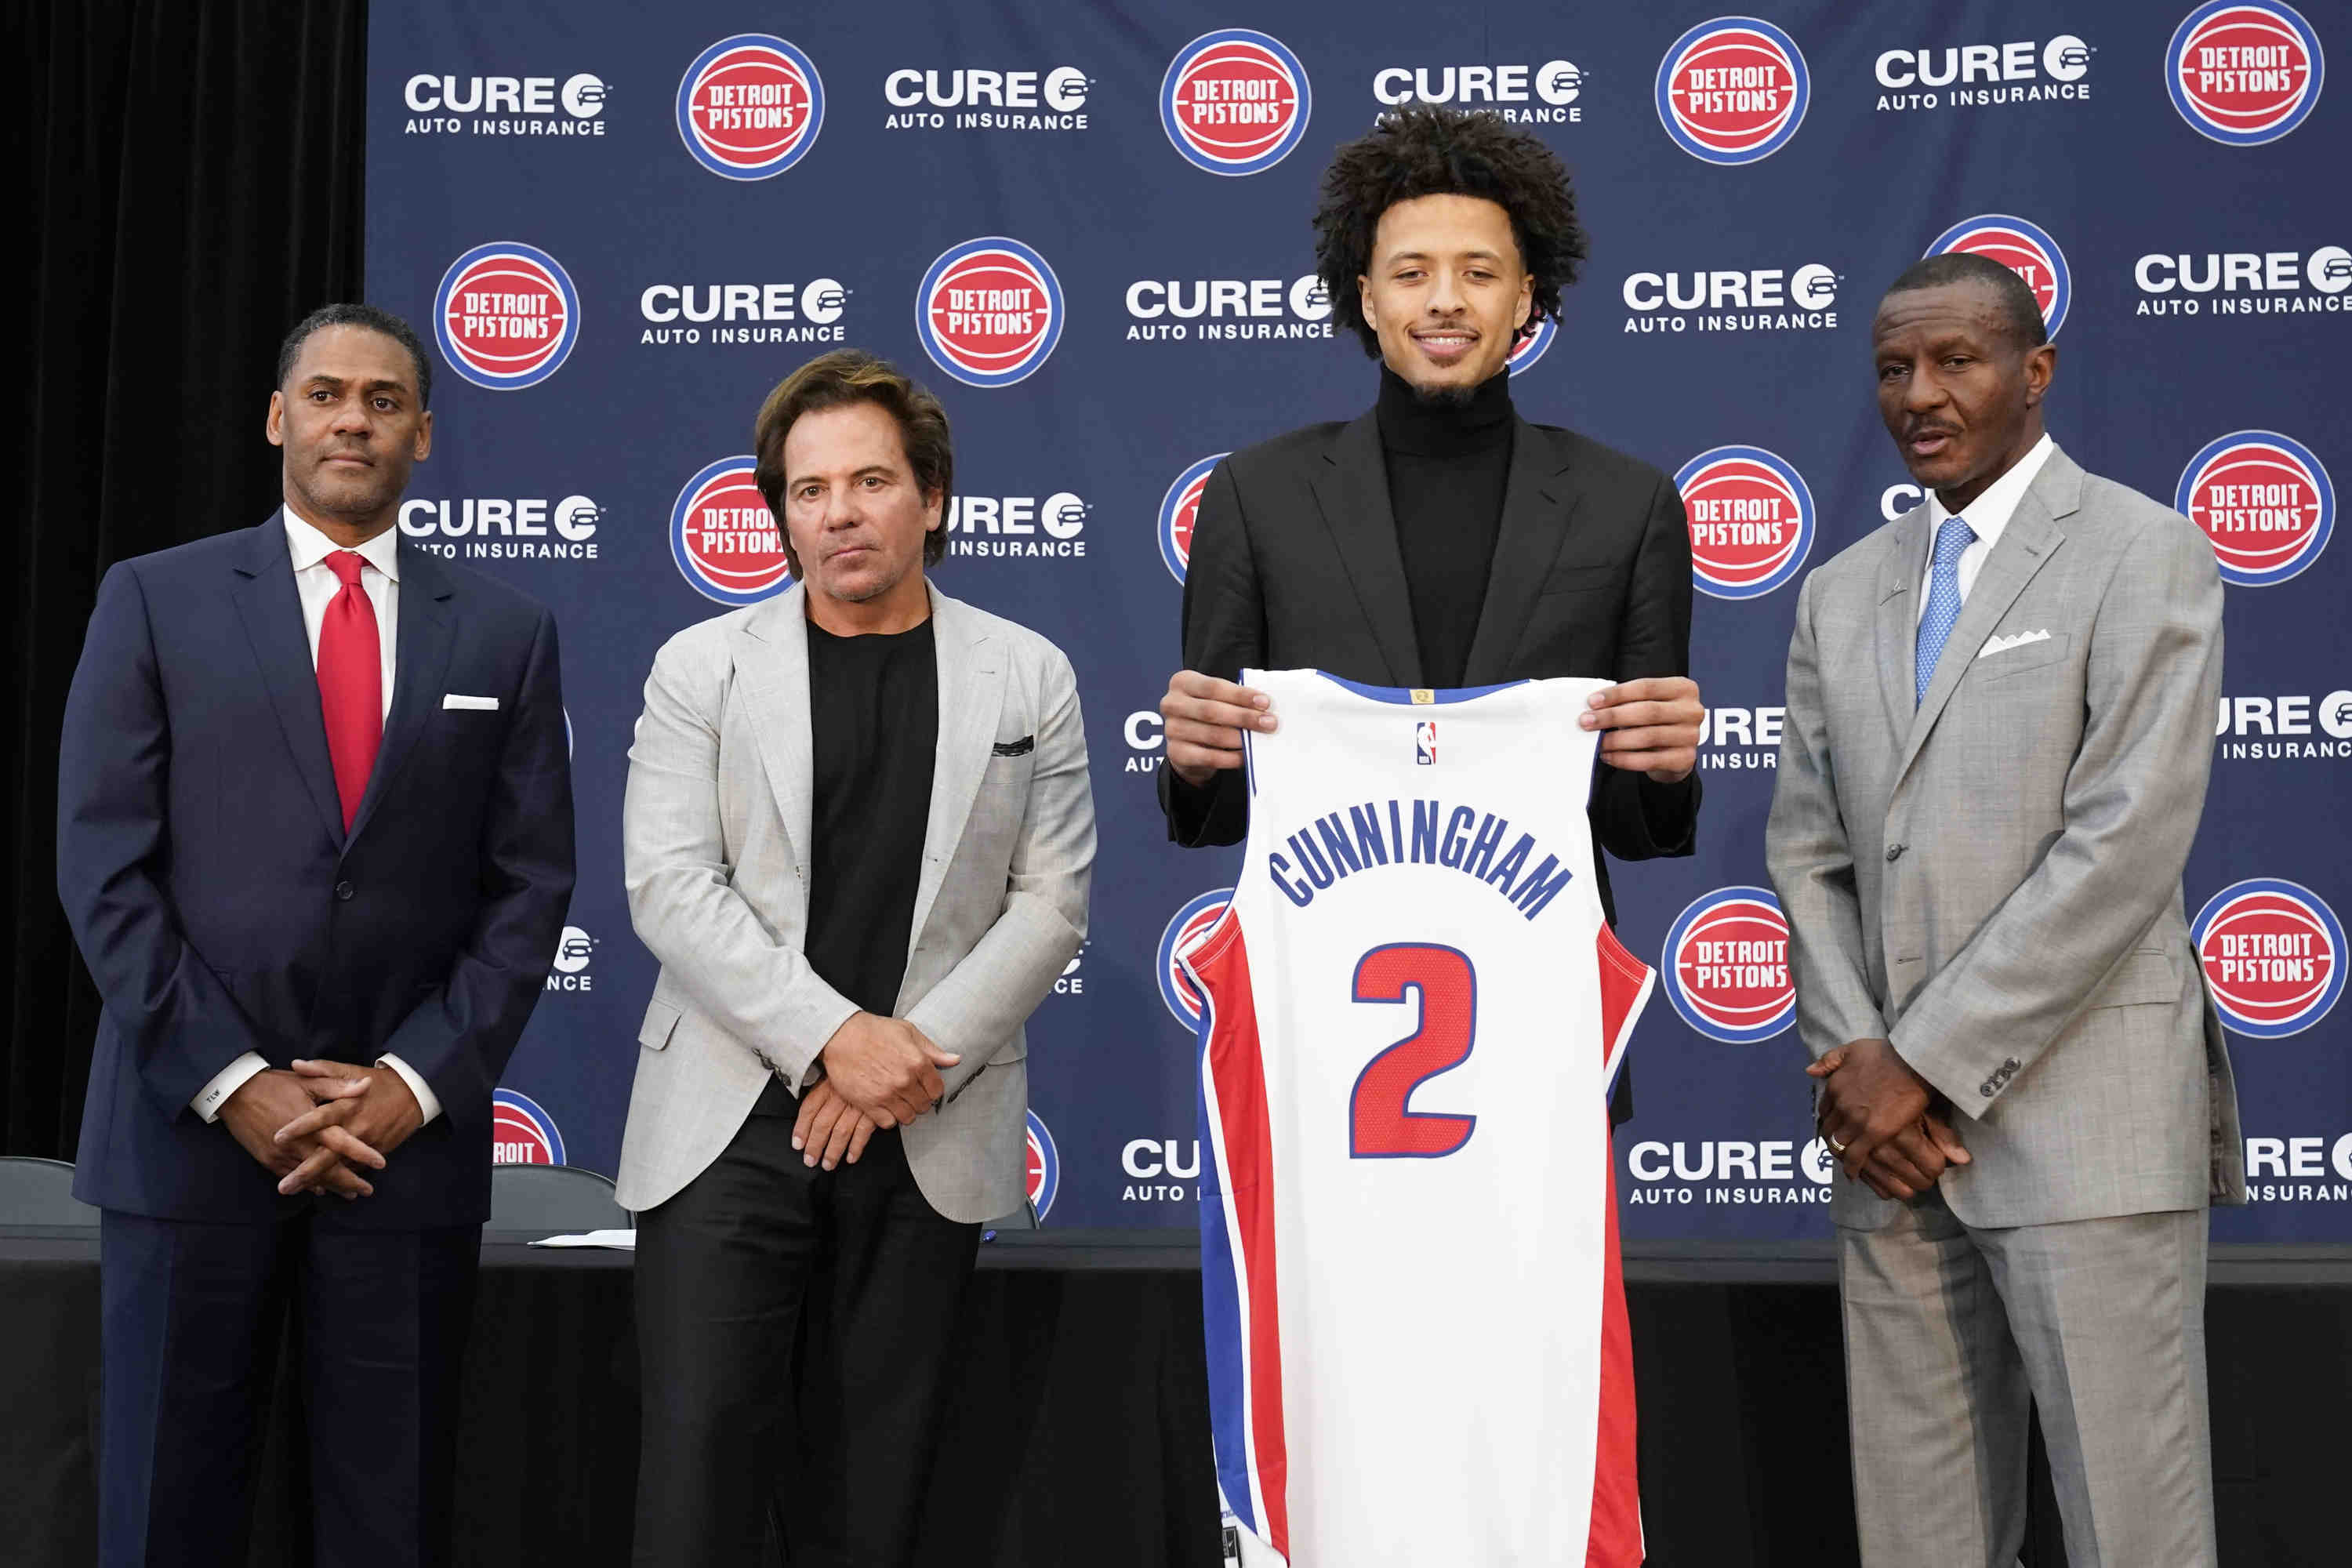 NBA Draft: Cade Cunningham's Detroit Pistons jersey now for sale 